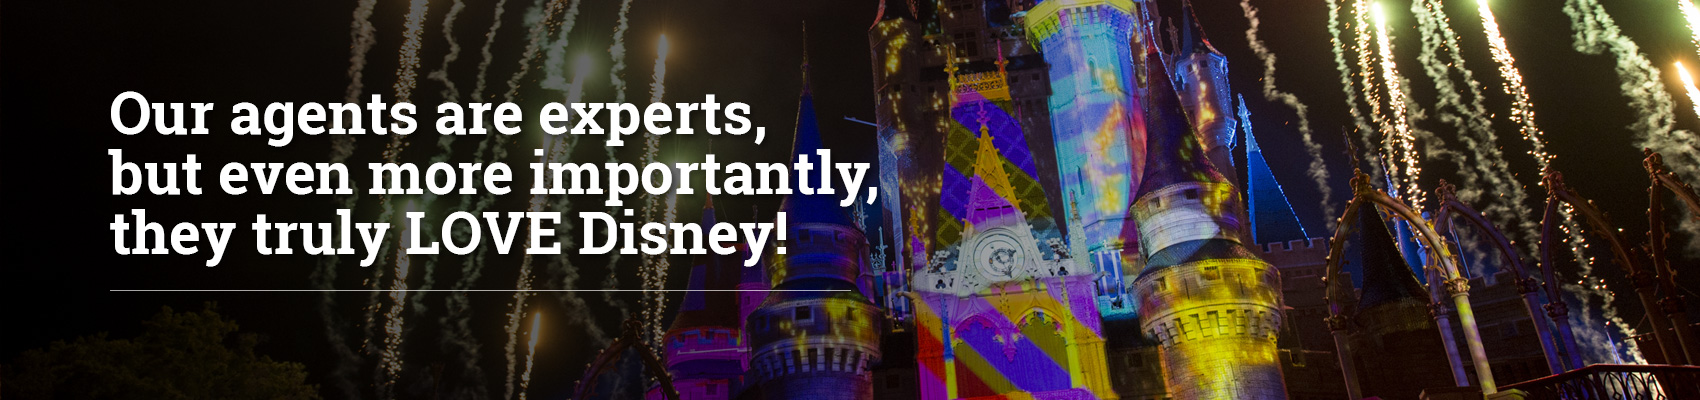 Our agents are experts, but even more importantly they truly LOVE Disney! 